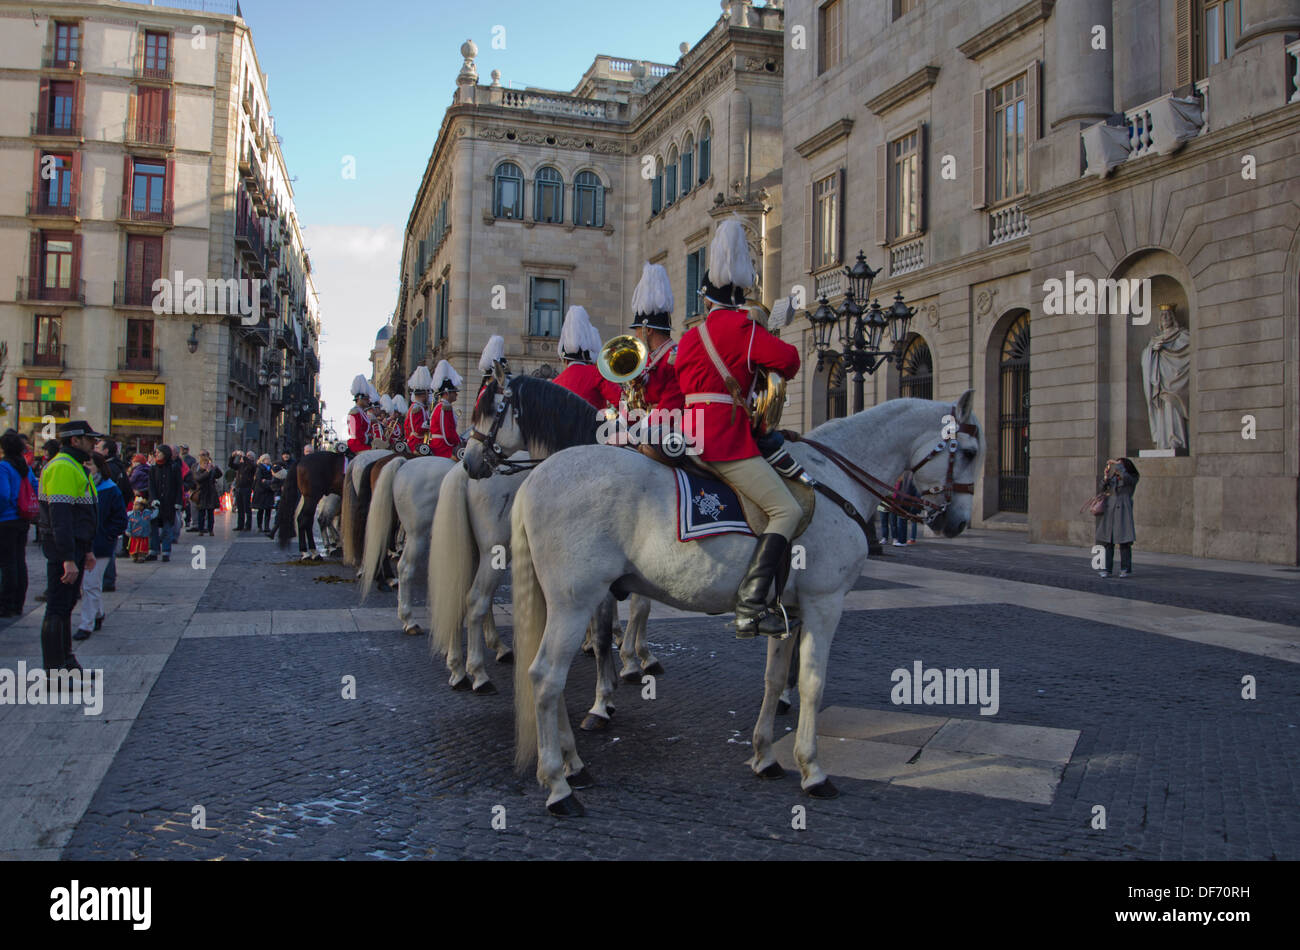 Europe, Spain, Barcelona, Council Square, traffic safety, horses, mounted police Stock Photo